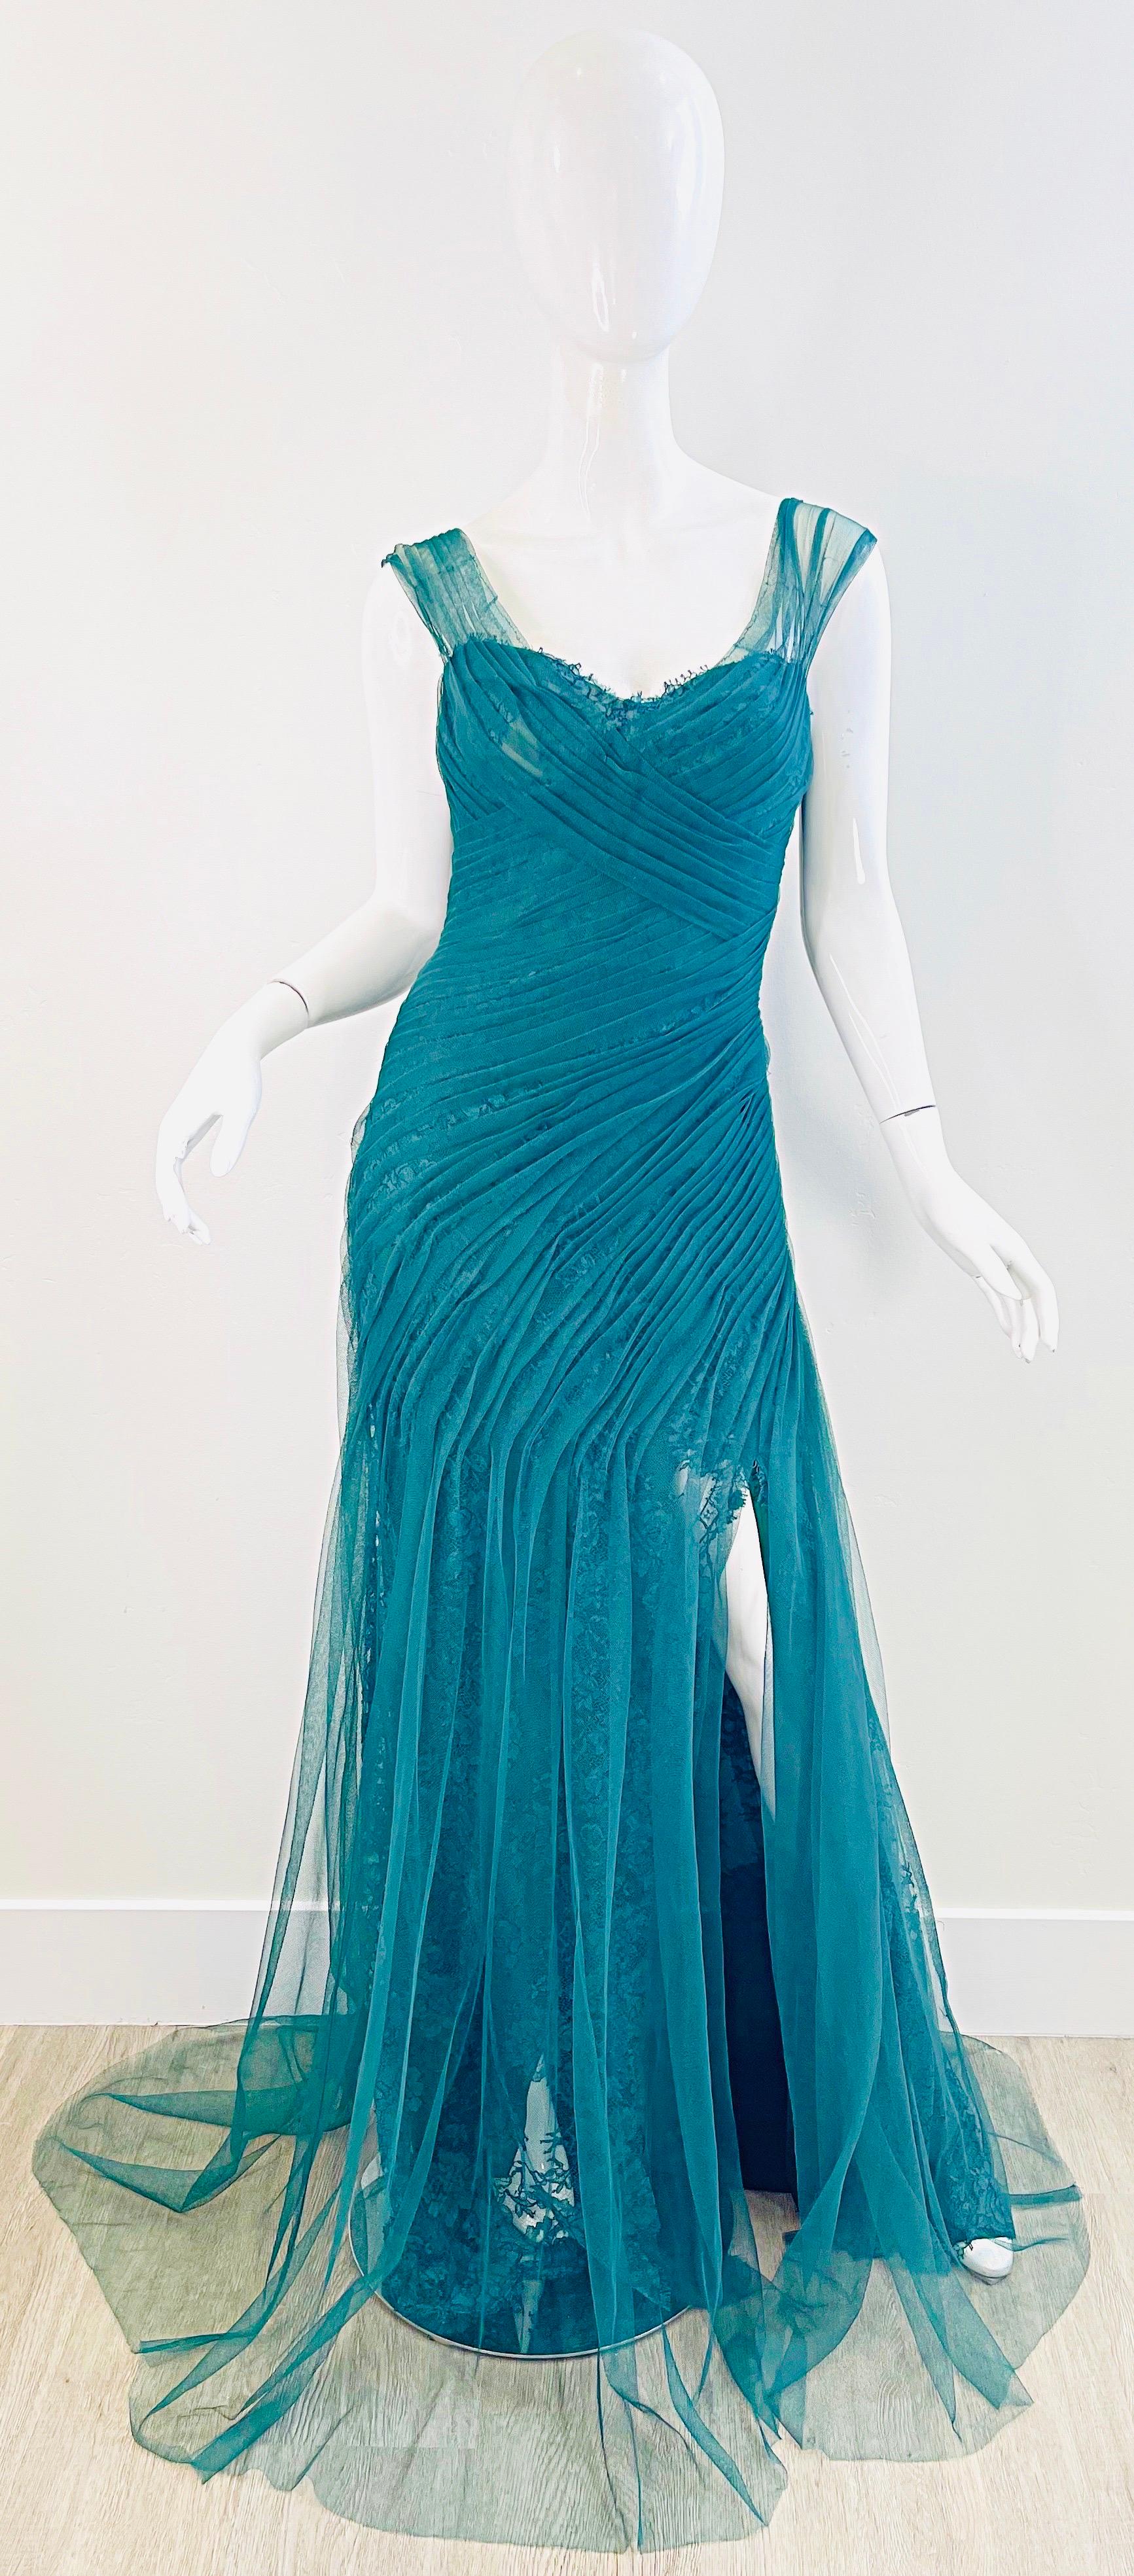 Women's NWT Monique Lhuillier Runway Spring 2013 Size 4 Emerald Green Lace Gown Dress For Sale